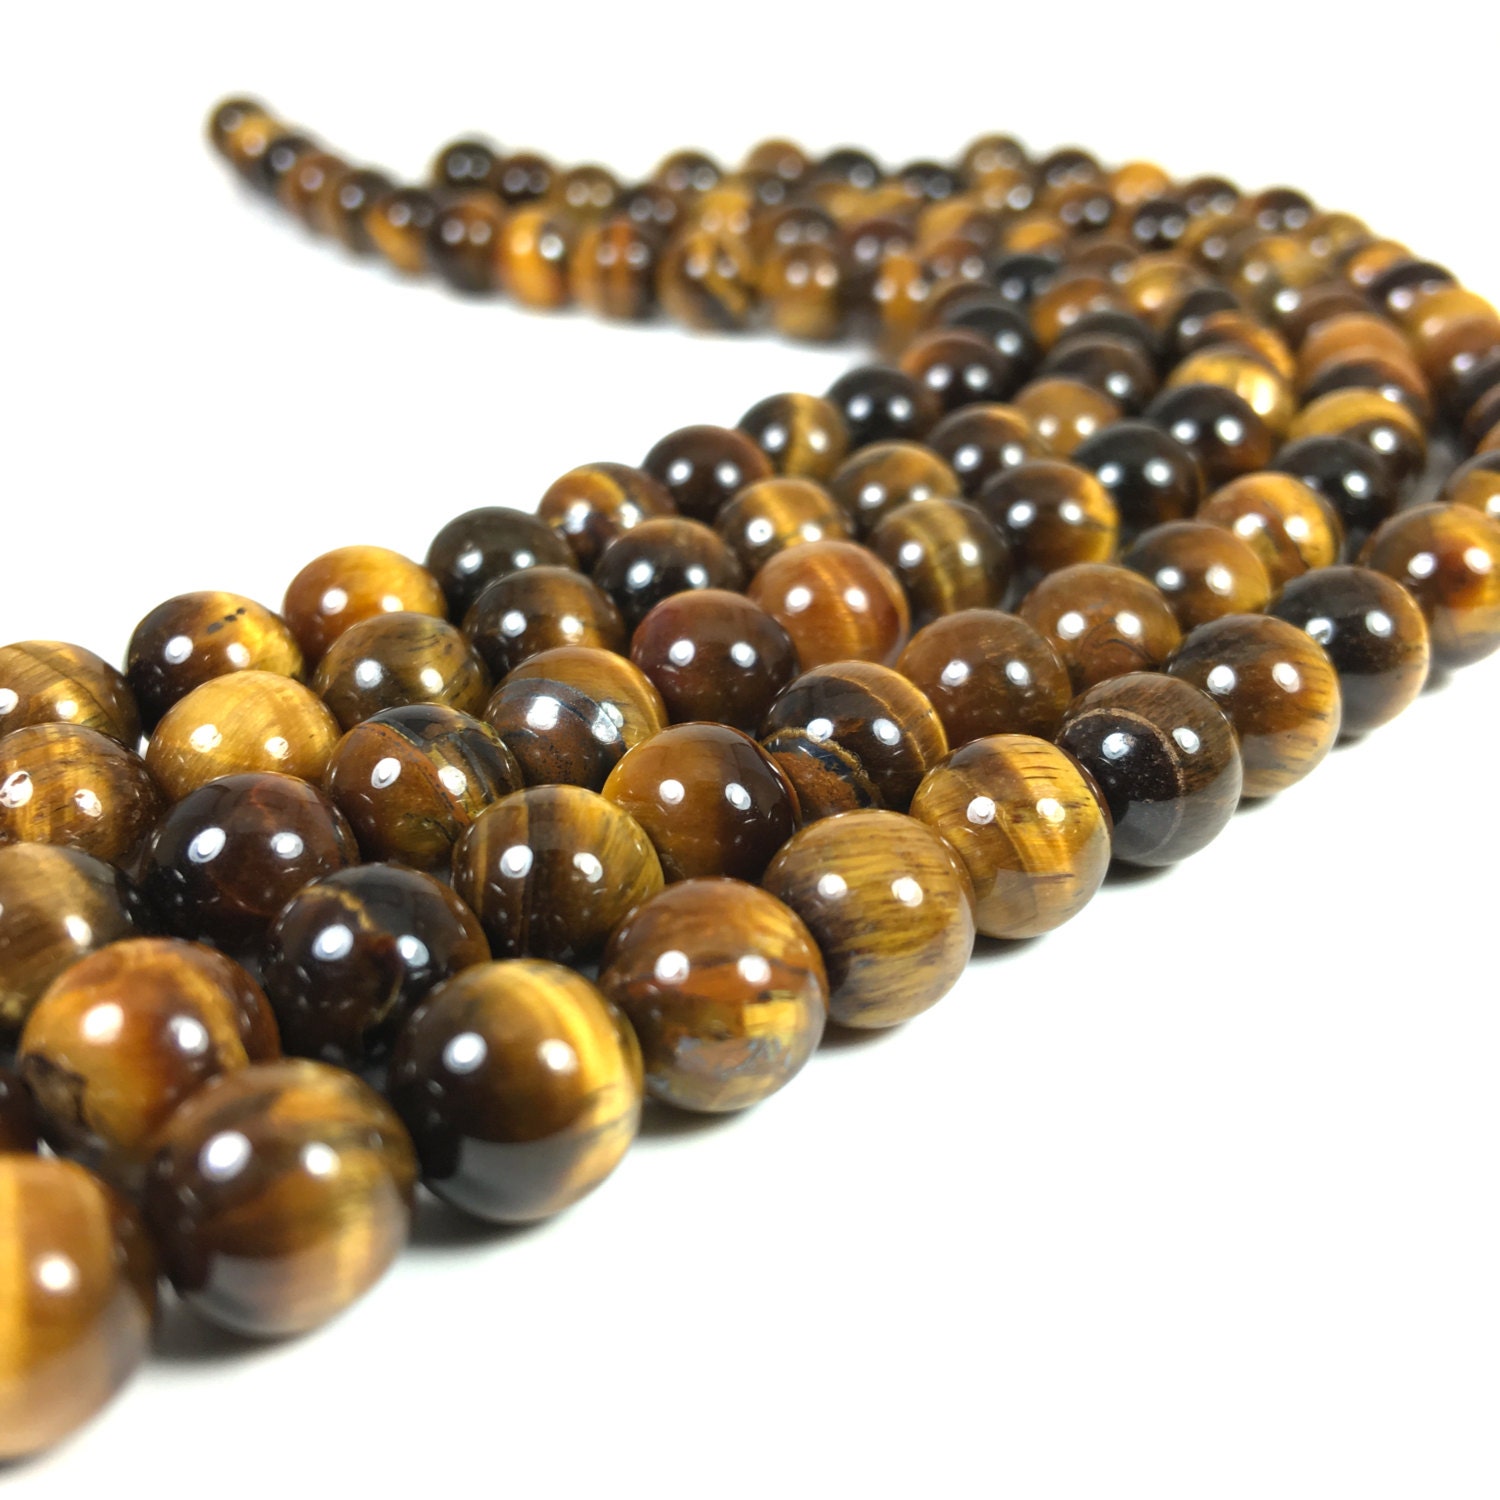 Multi Colored Tiger Eye Faceted Beads - 6mm - A Grain of Sand